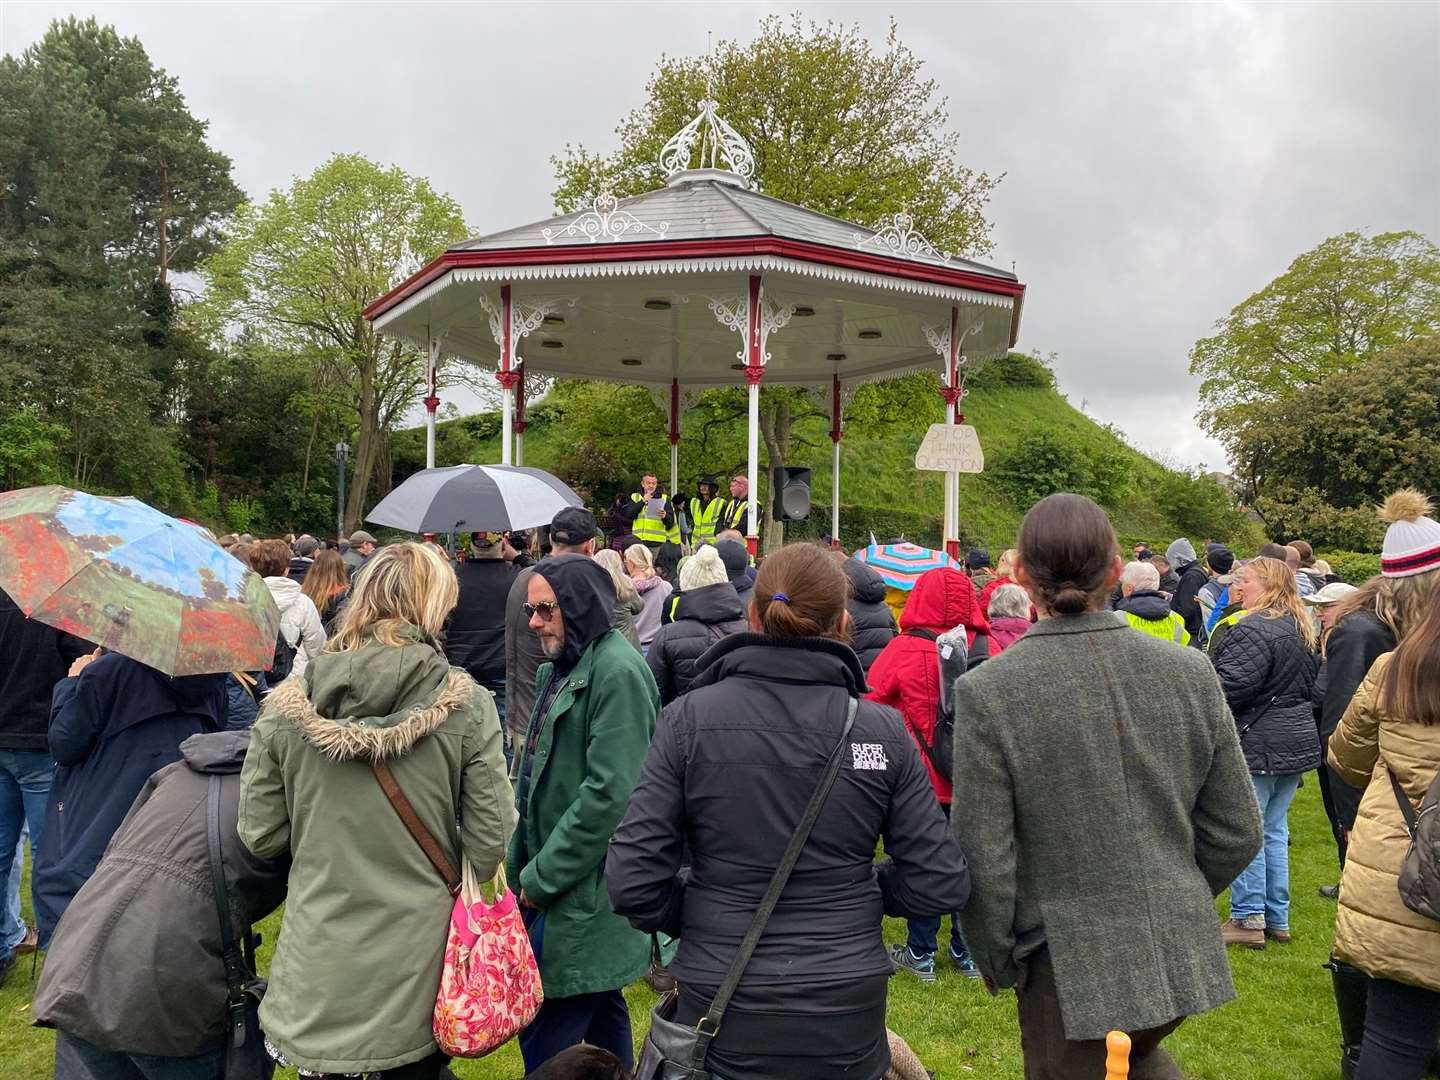 Demonstrators gather at the World Wide Freedom Rally in Dane John Gardens, Canterbury